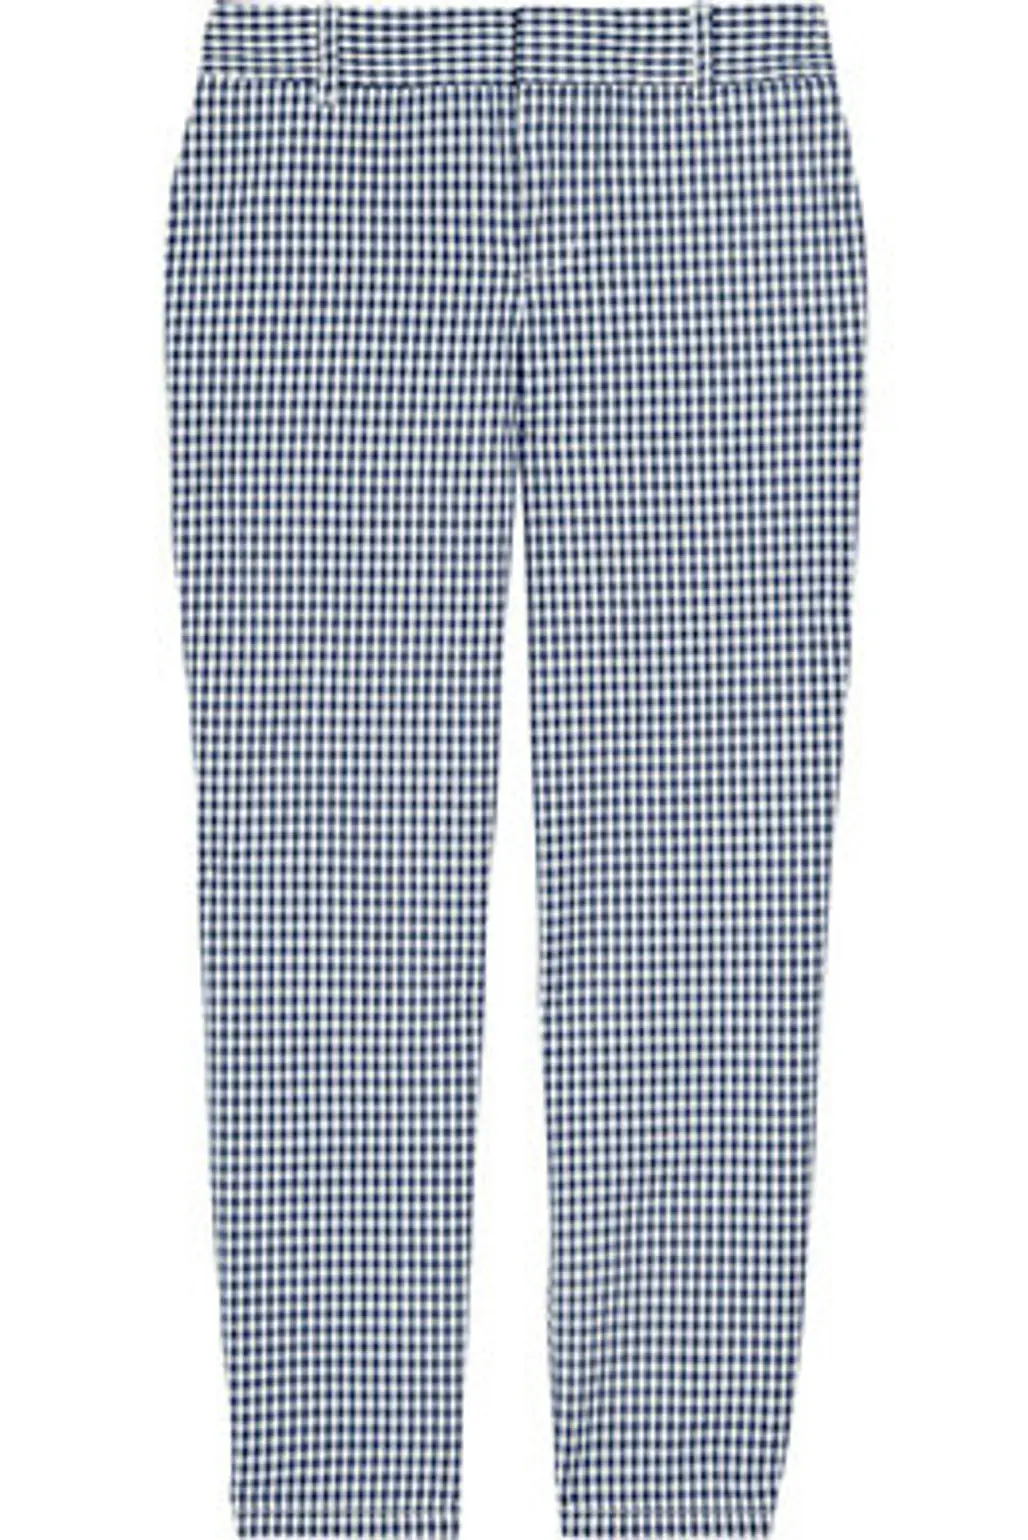 J.Crew Gingham Cropped Cotton Pants